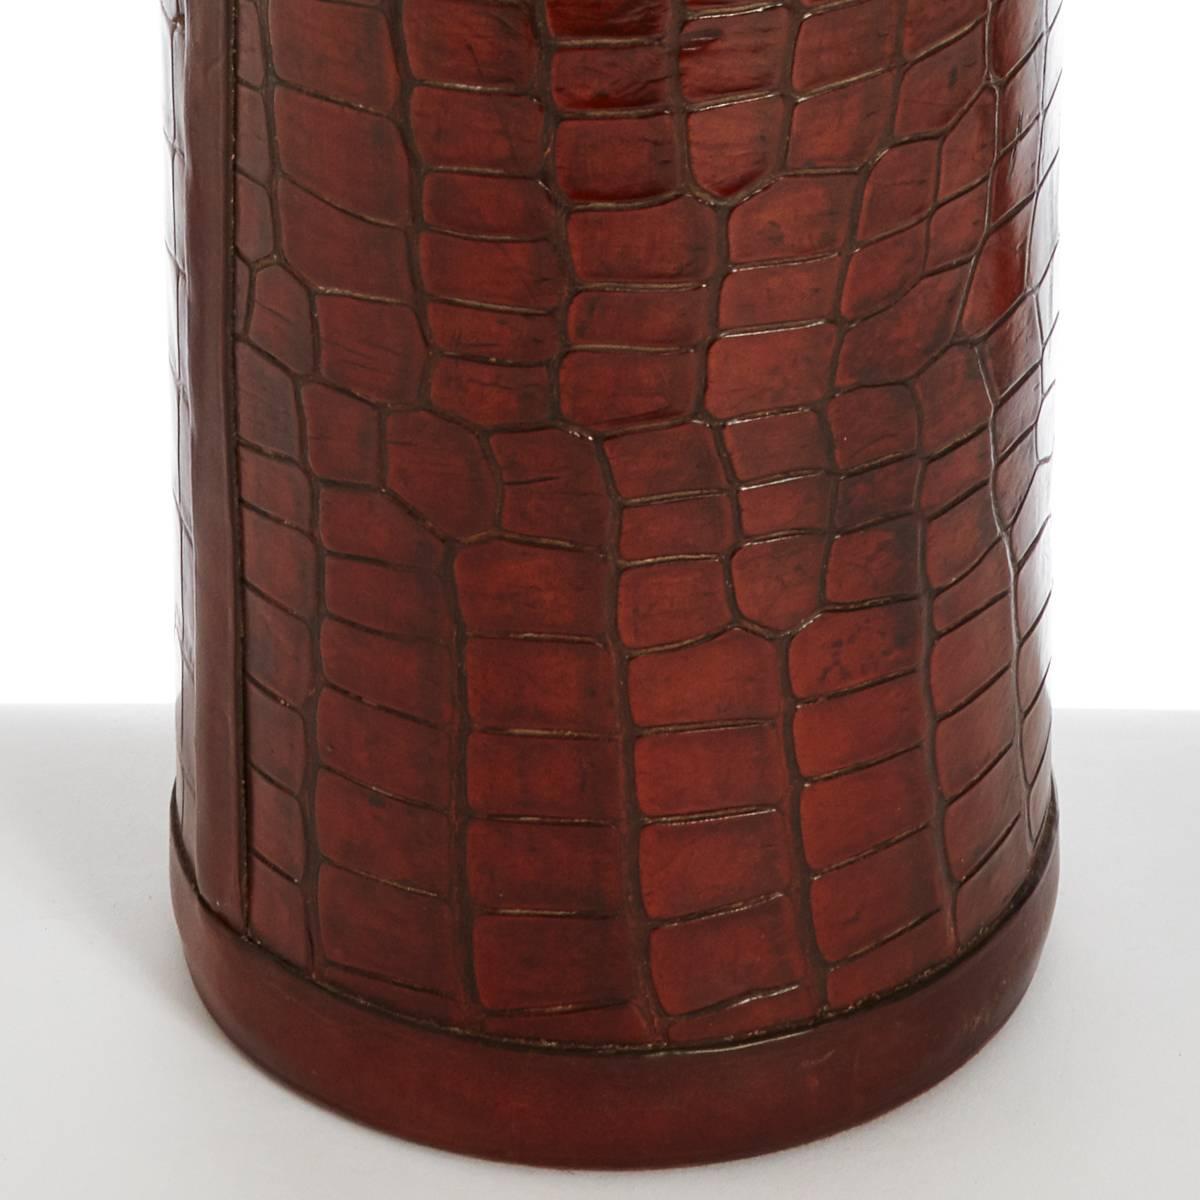 A vintage crocodile walking stick display stand.
Robust crocodile exterior with plain leather trim to both the upper and lower rim, the interior has been relined with heavy duty grey fabric.

Please note that this listing is for the stand alone